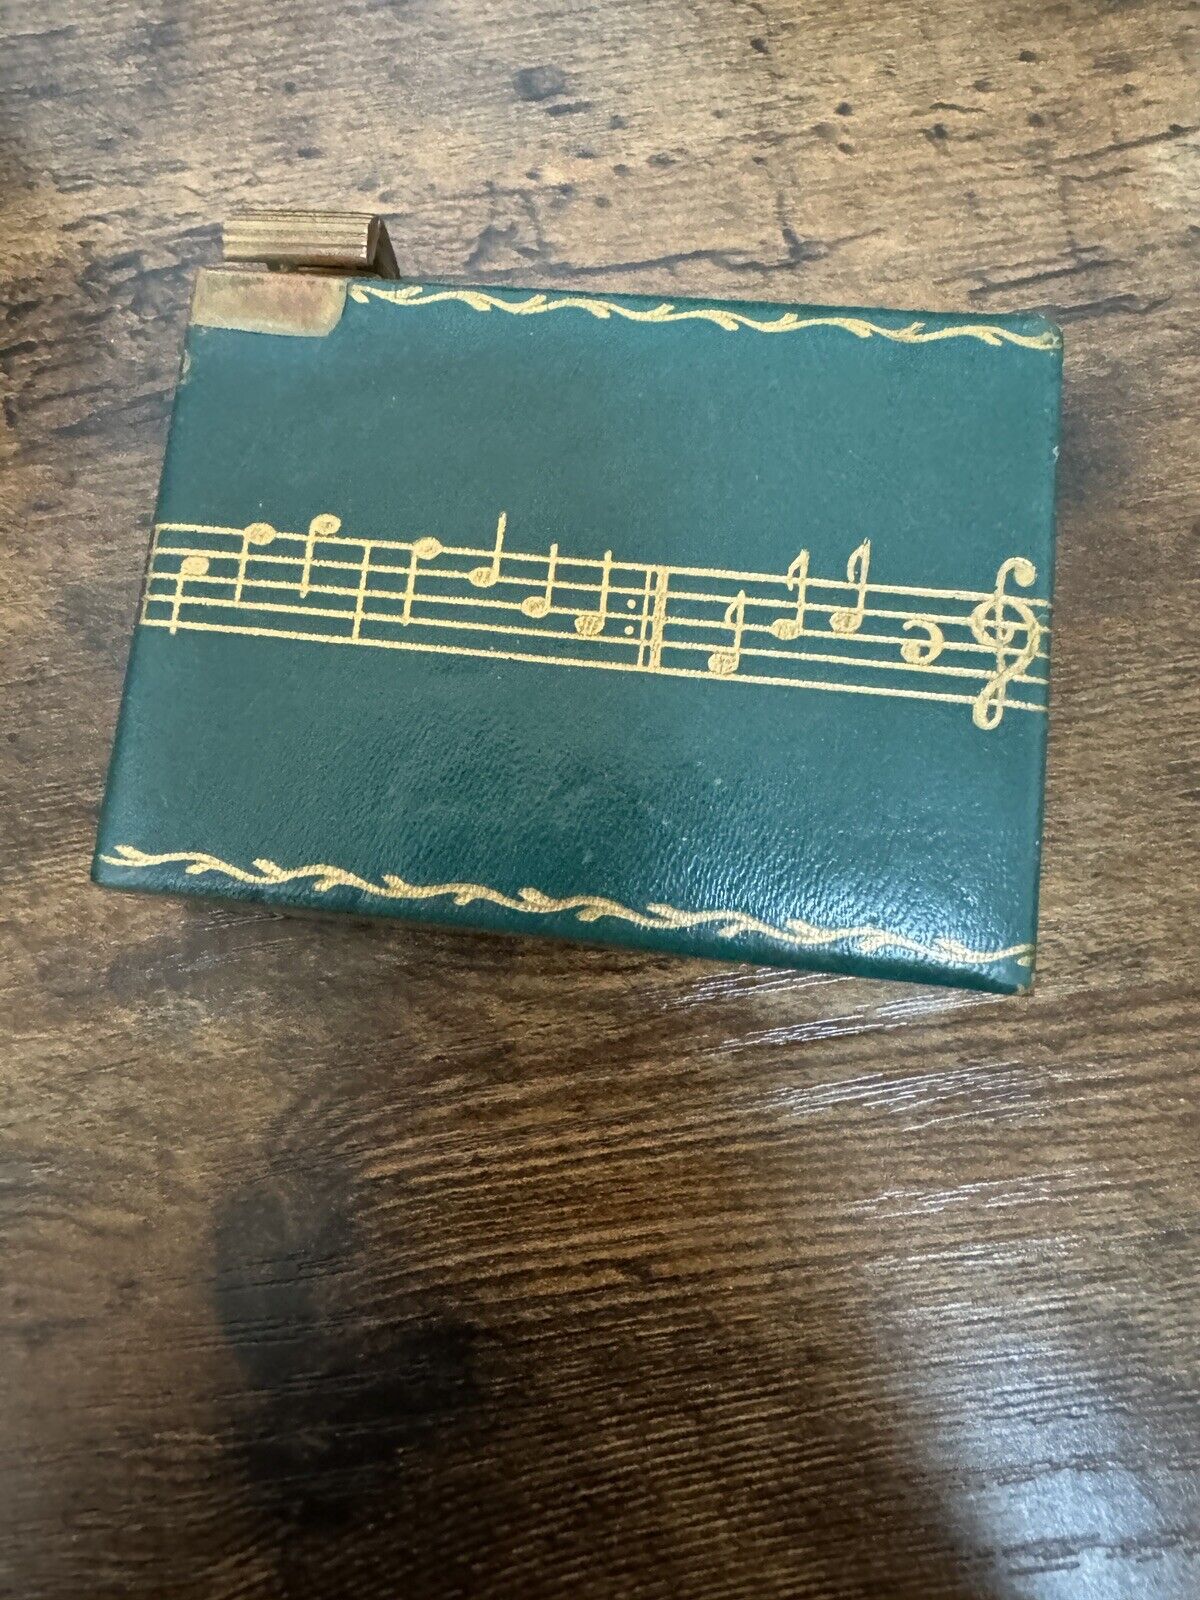 compact musical case vintage Estate Find Works But Slow As Found